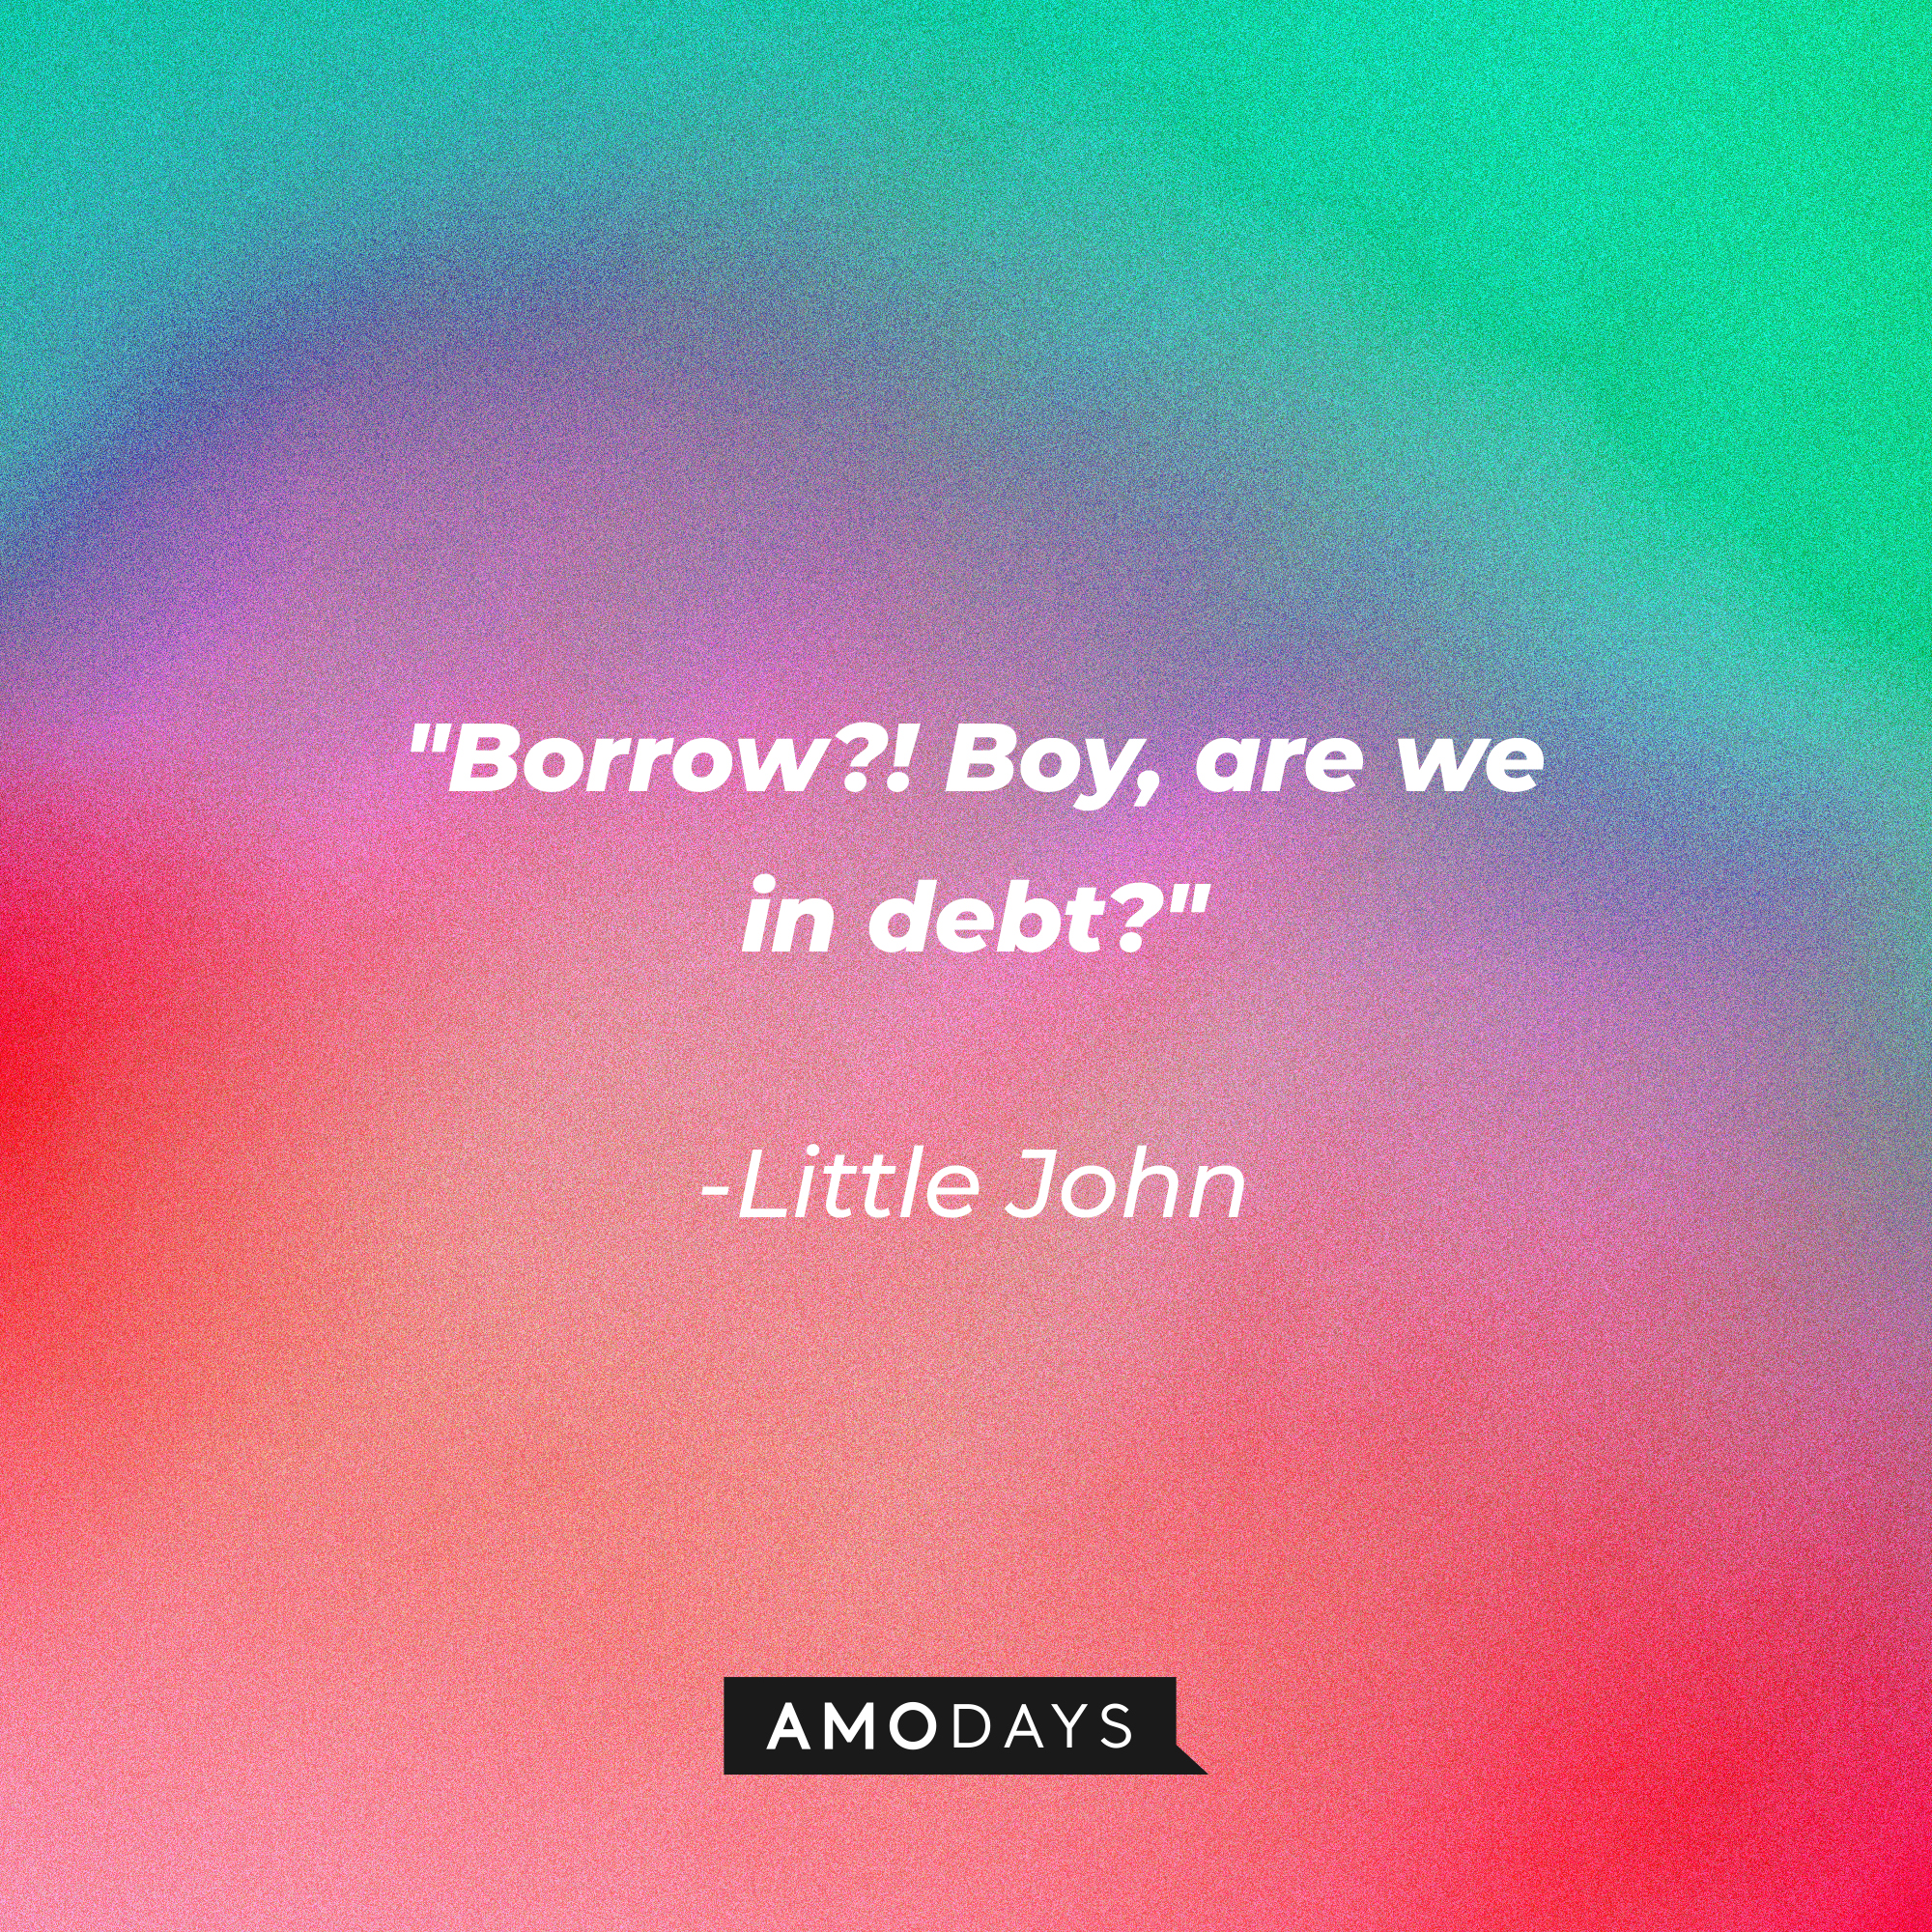 Little John's quote: "Borrow?! Boy, are we in debt?" | Source: Amodays